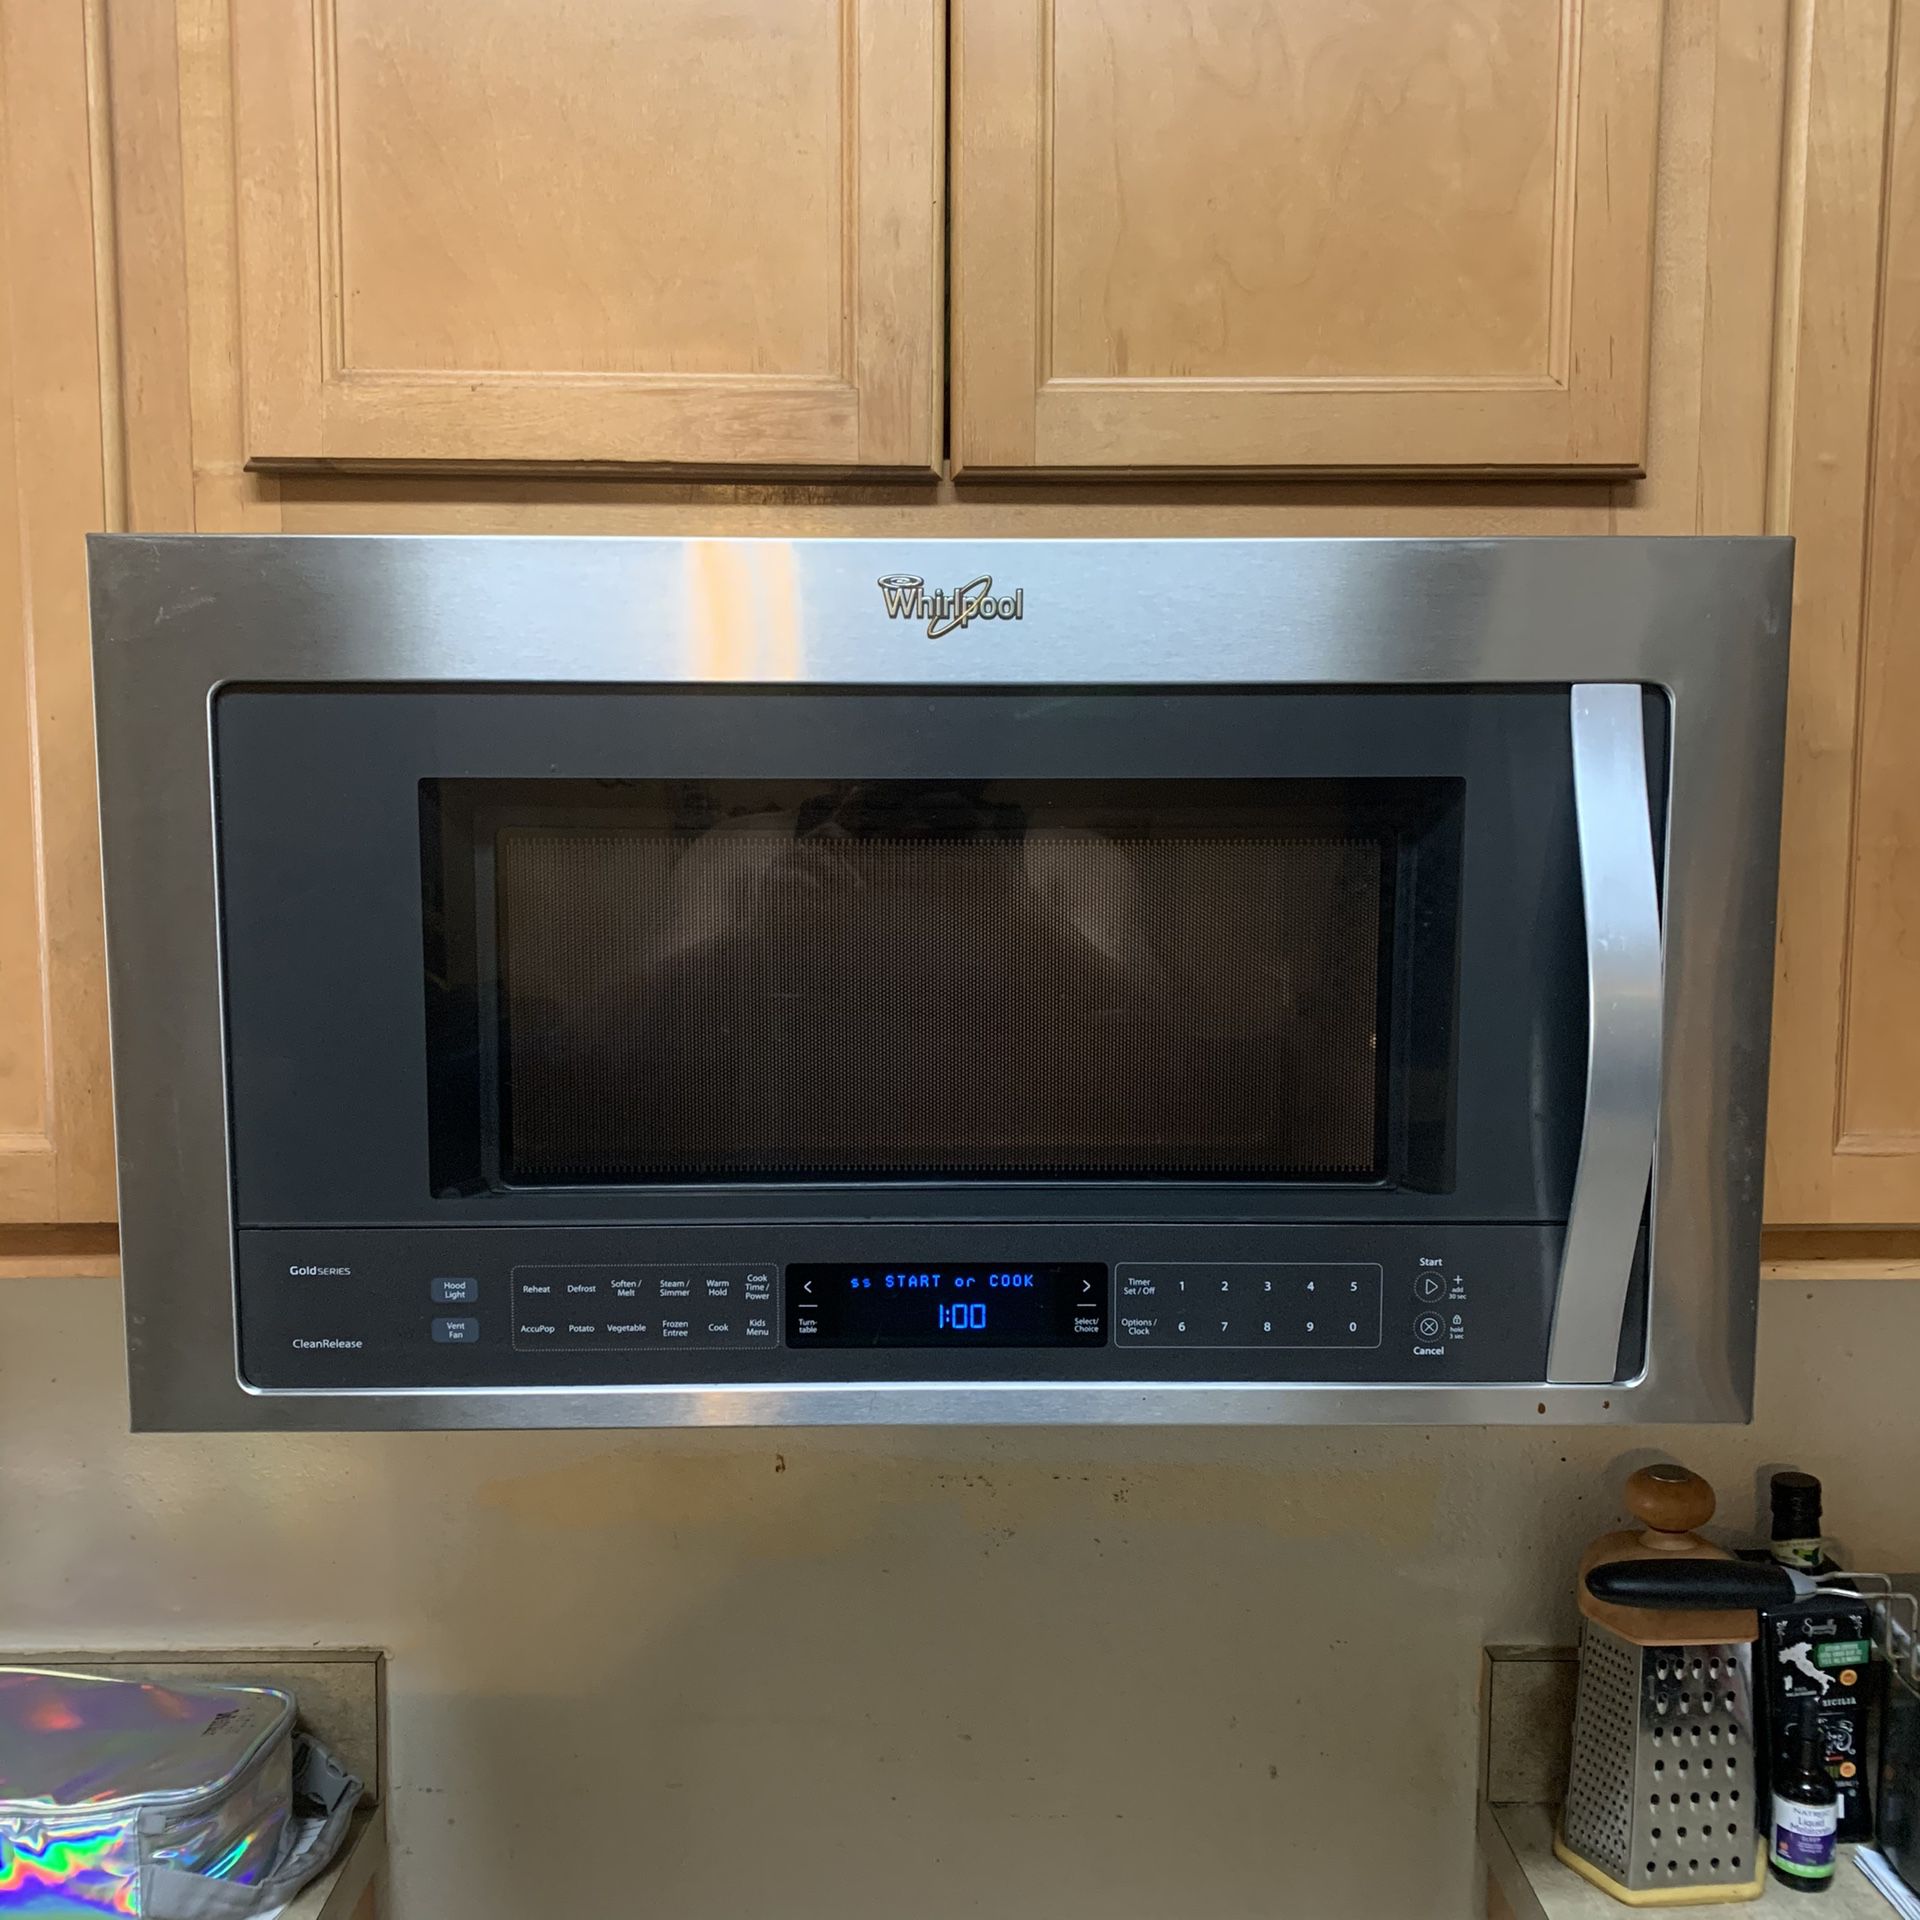 Whirlpool Gold over the range microwave